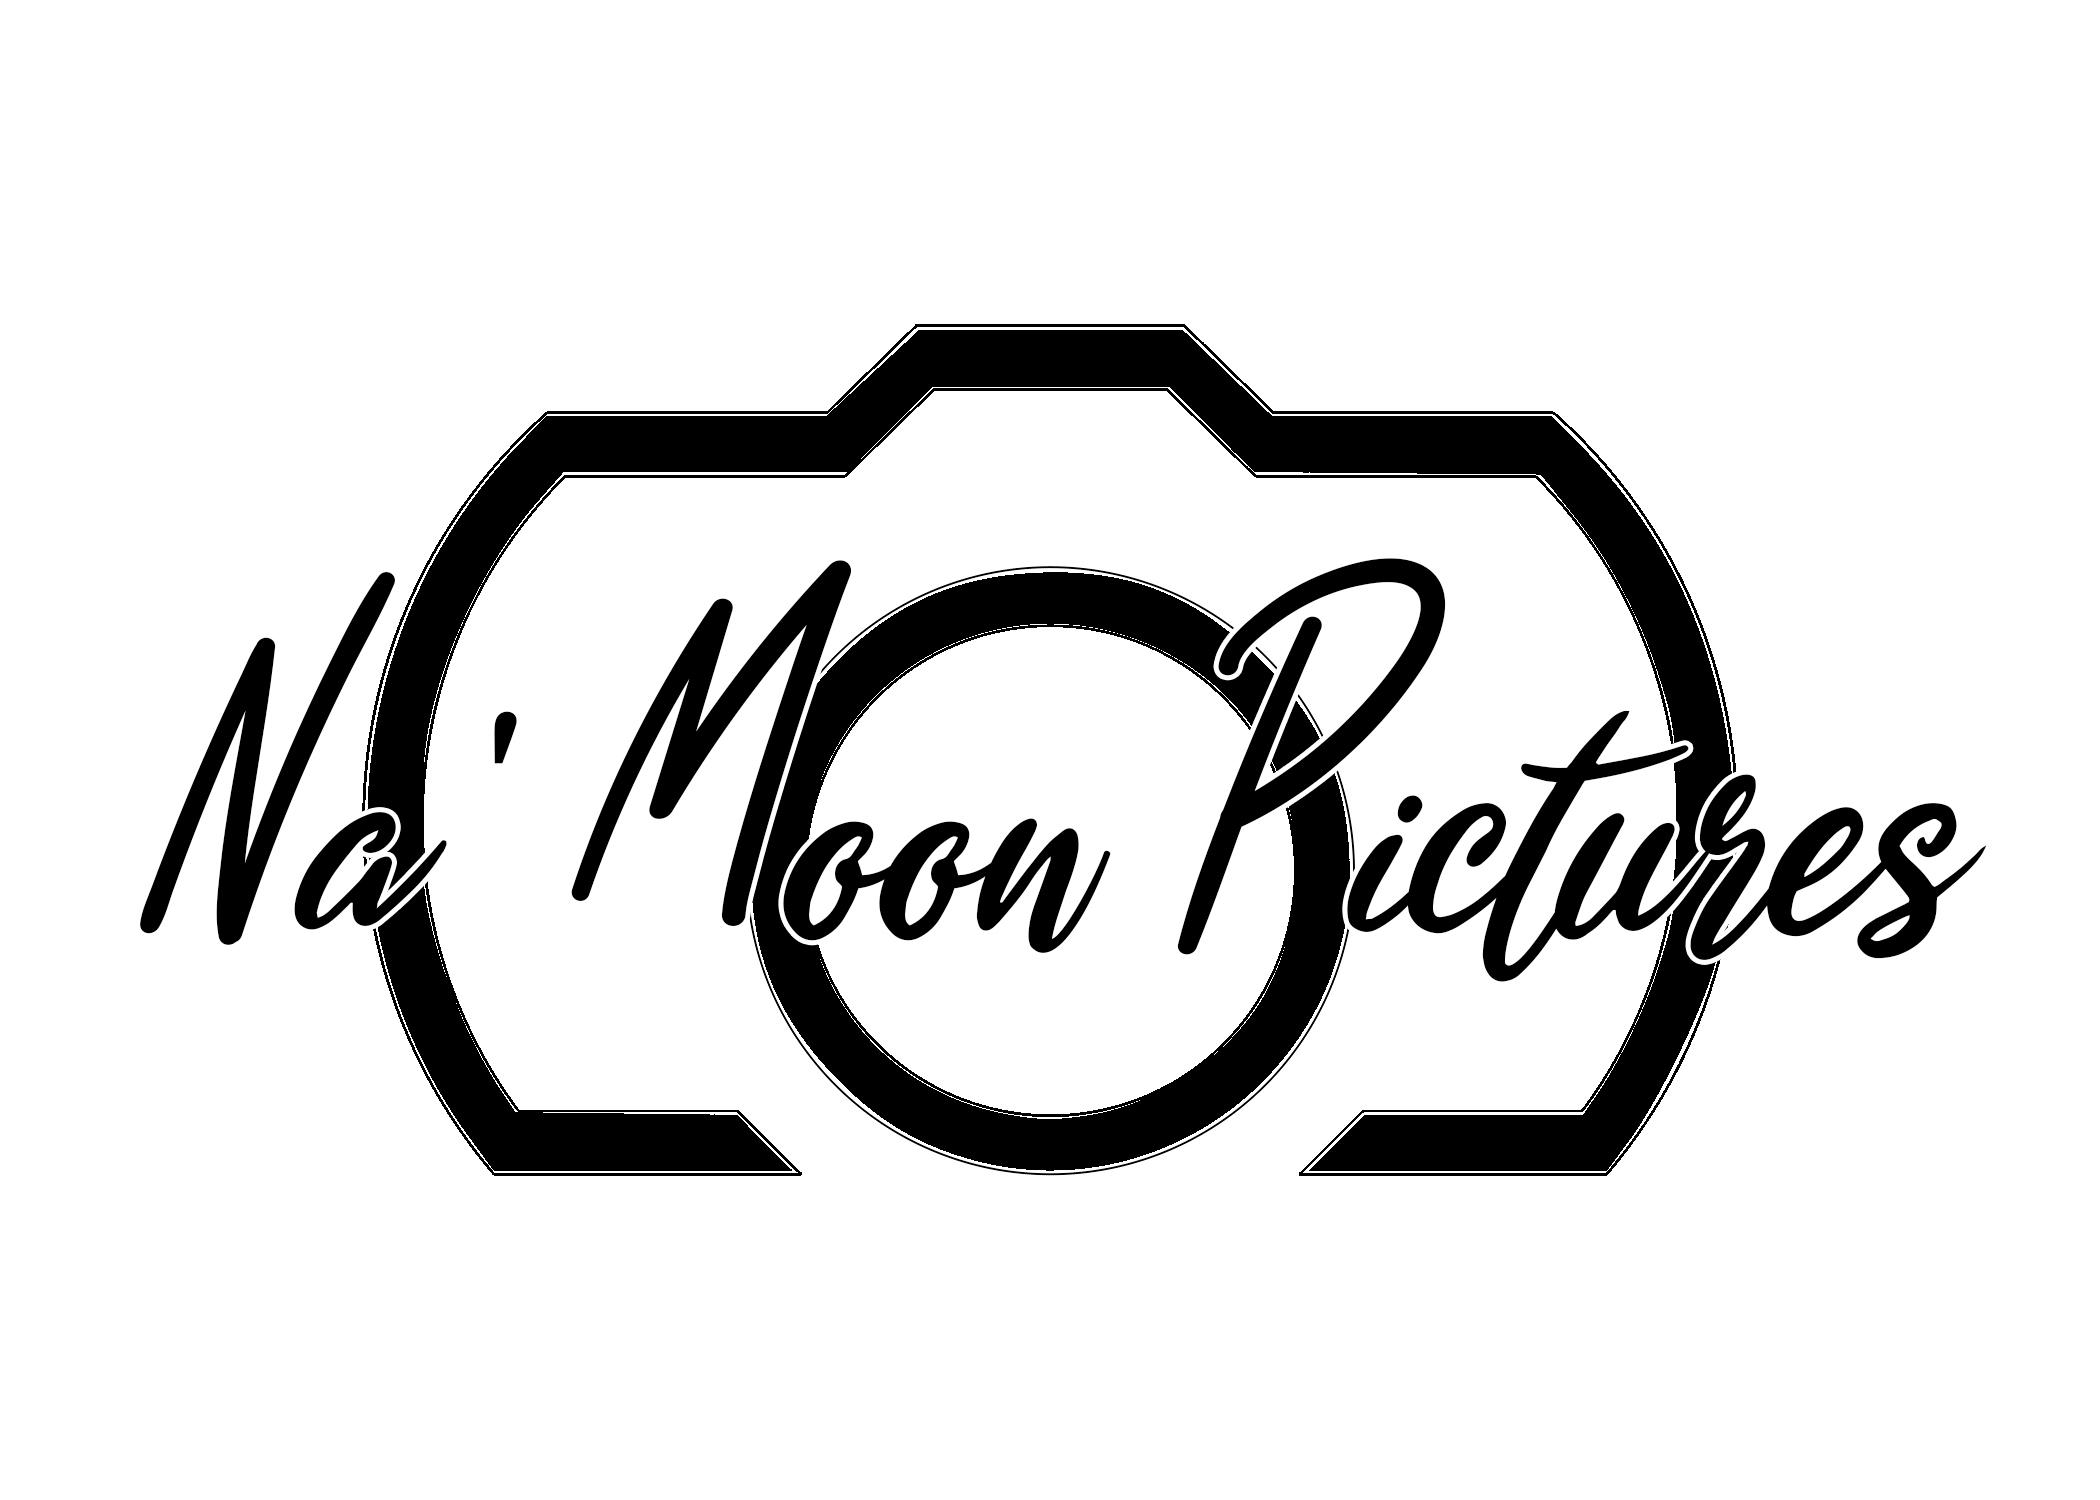 Na' Moon Pictures Logo